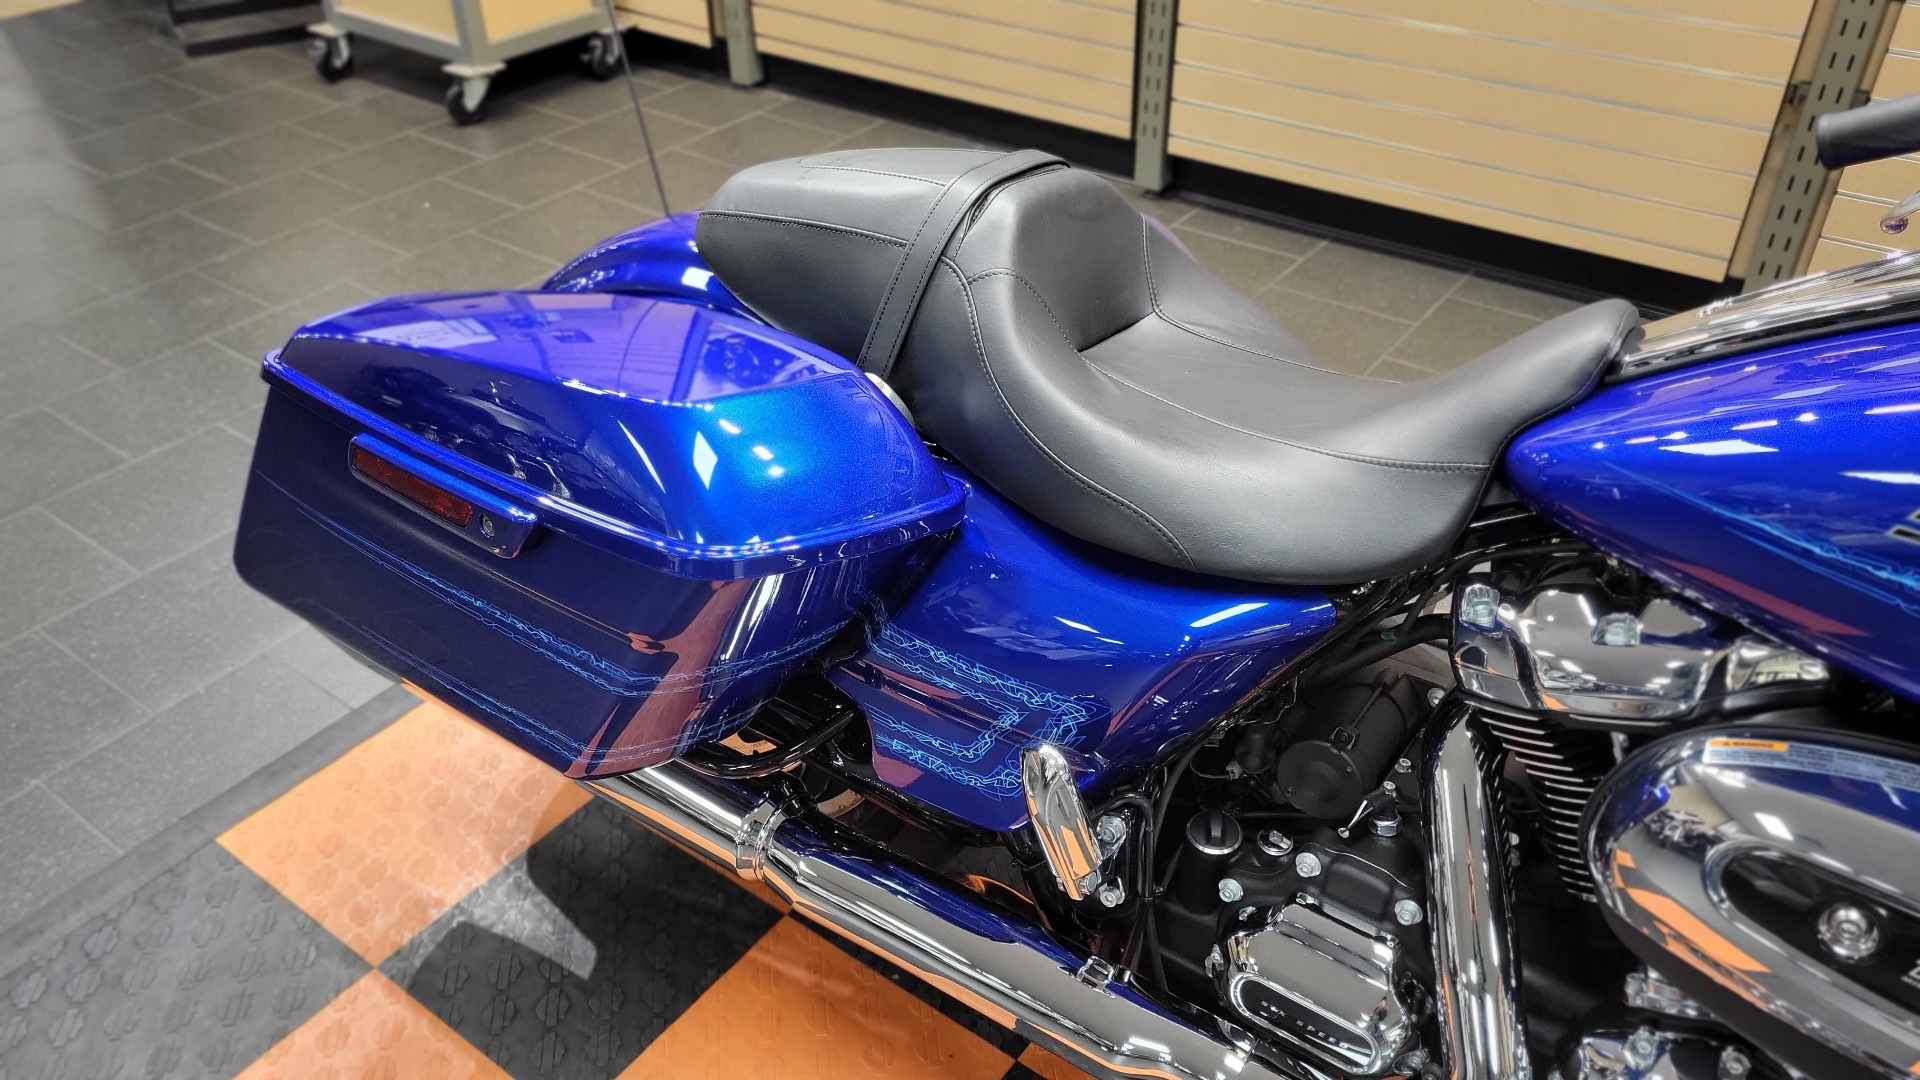 2019 Harley-Davidson Street Glide® in The Woodlands, Texas - Photo 6